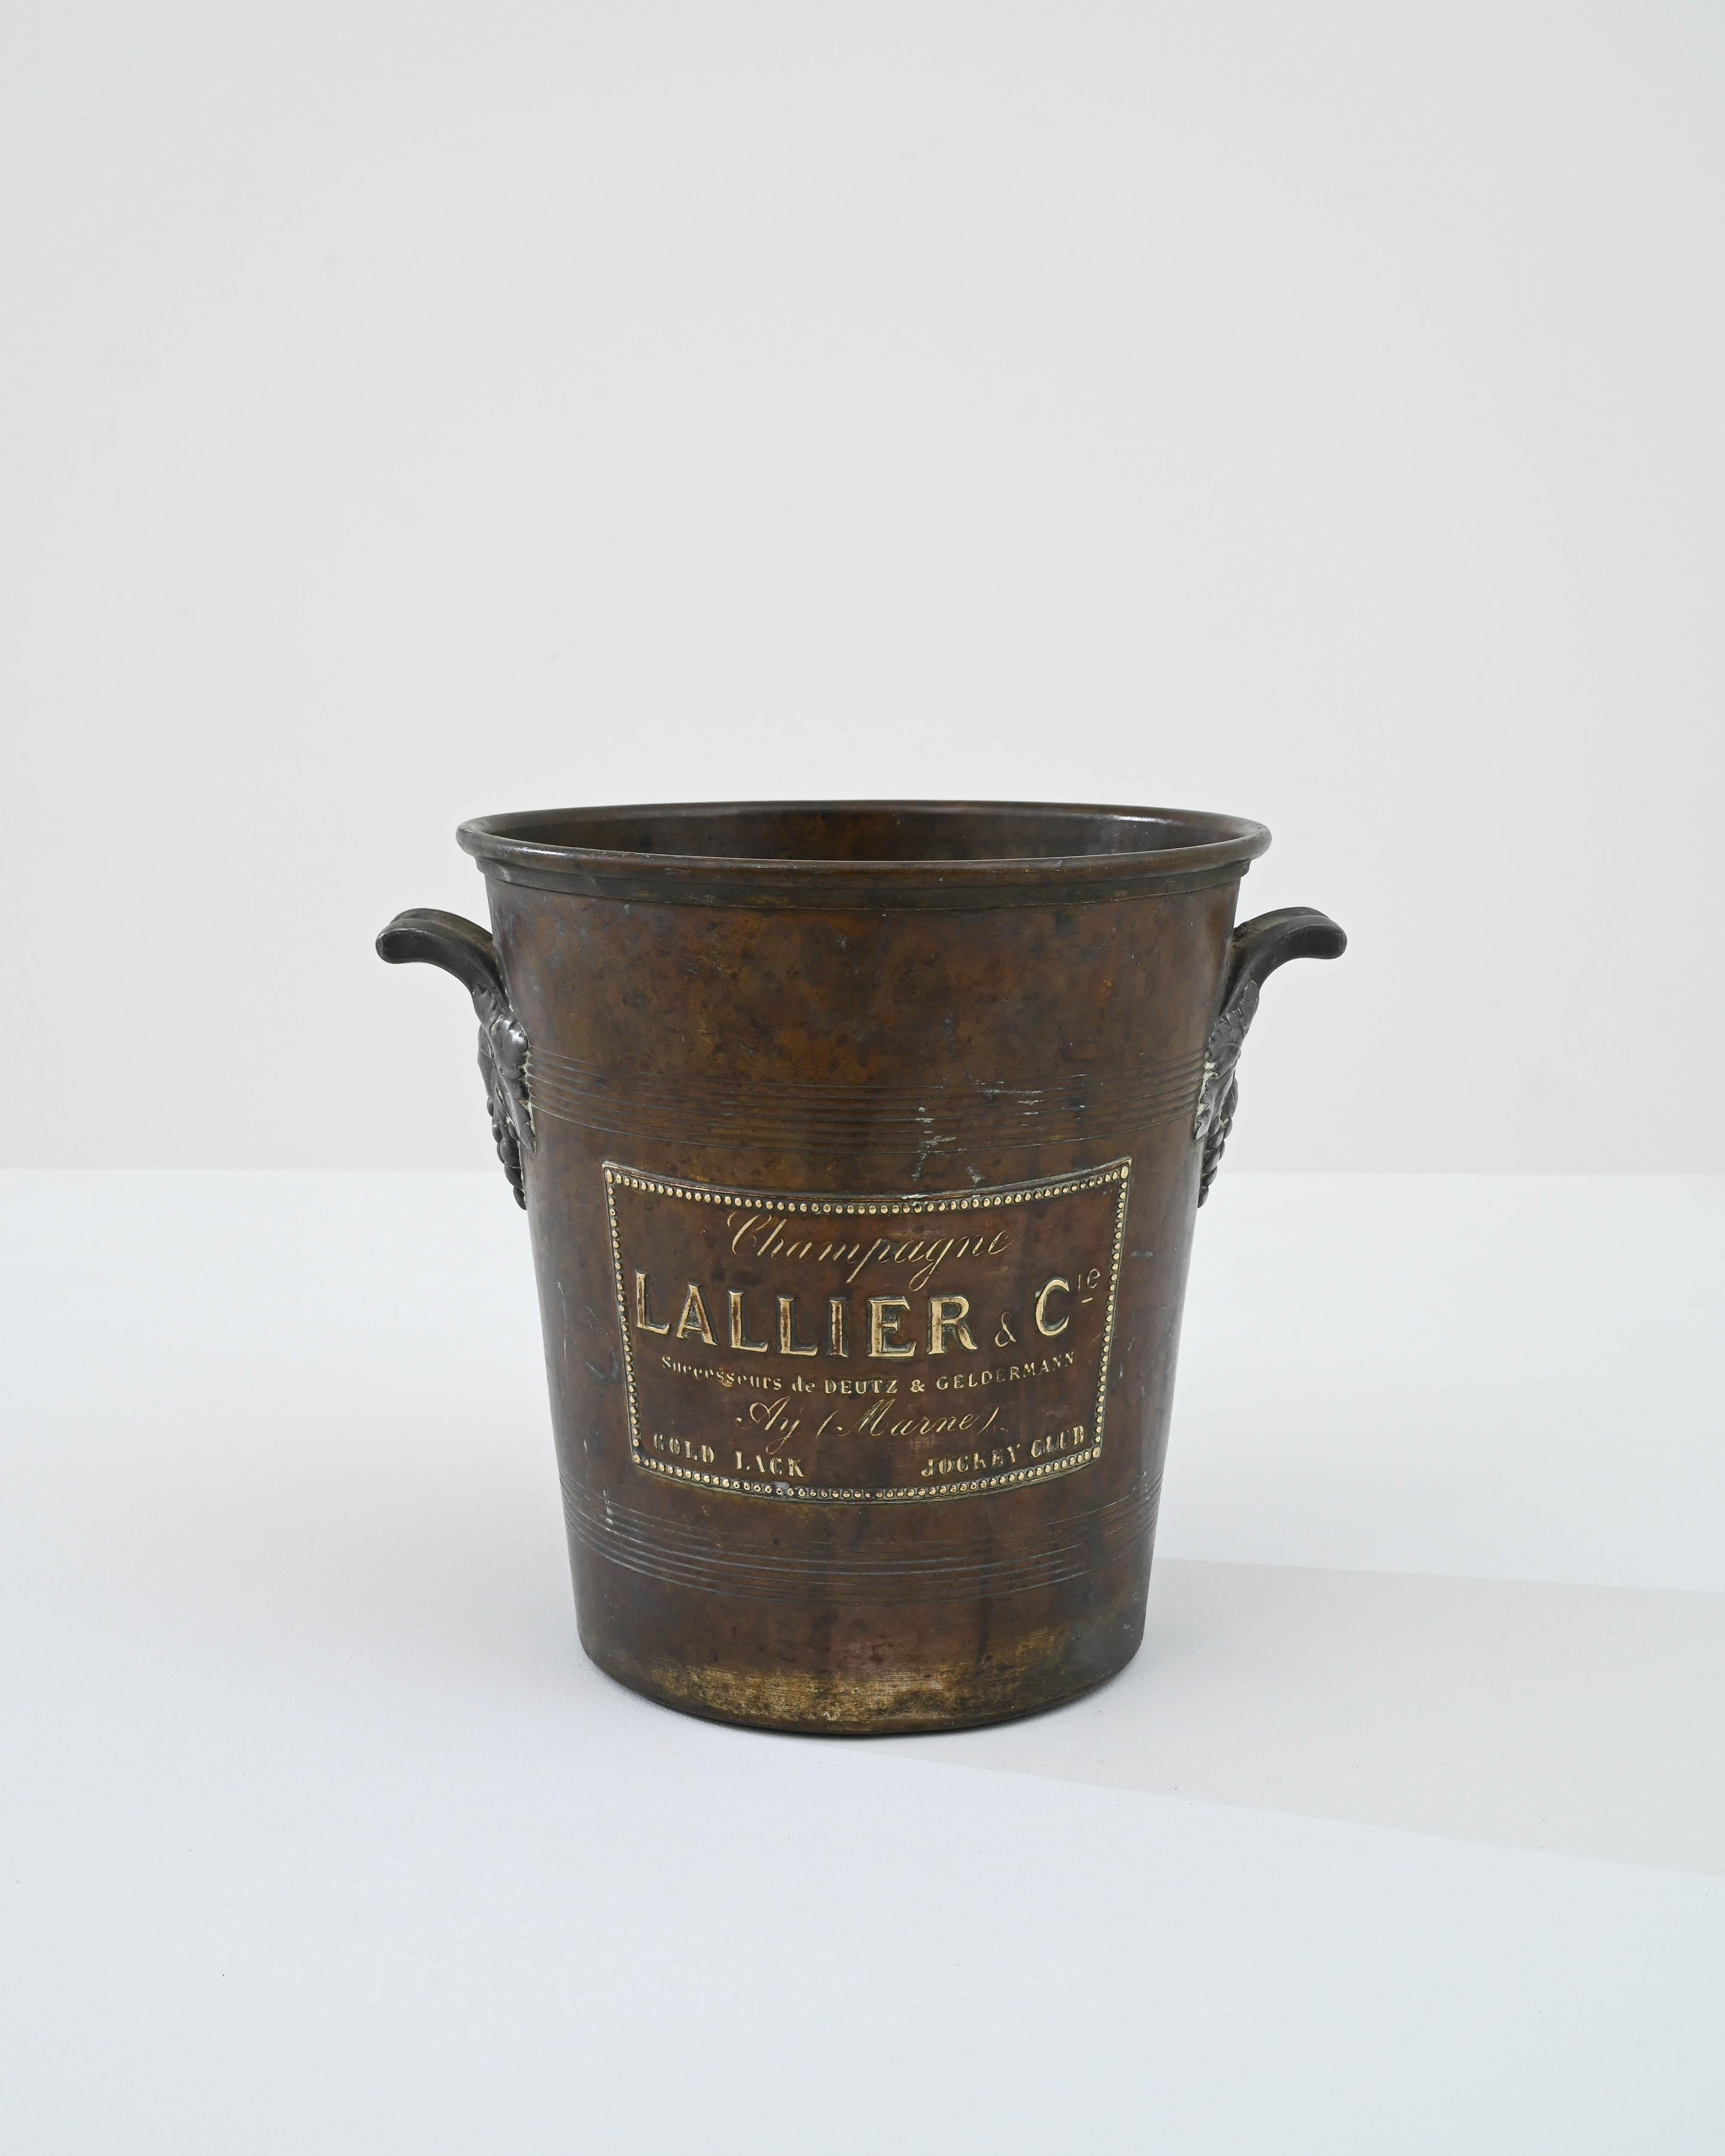 This vintage ice bucket evokes the glamorous parties of yesteryear. From before the era of refrigeration, this was an essential appliance for every party or quiet evening refreshment. Made in France in the 20th century, this bucket is emblazoned